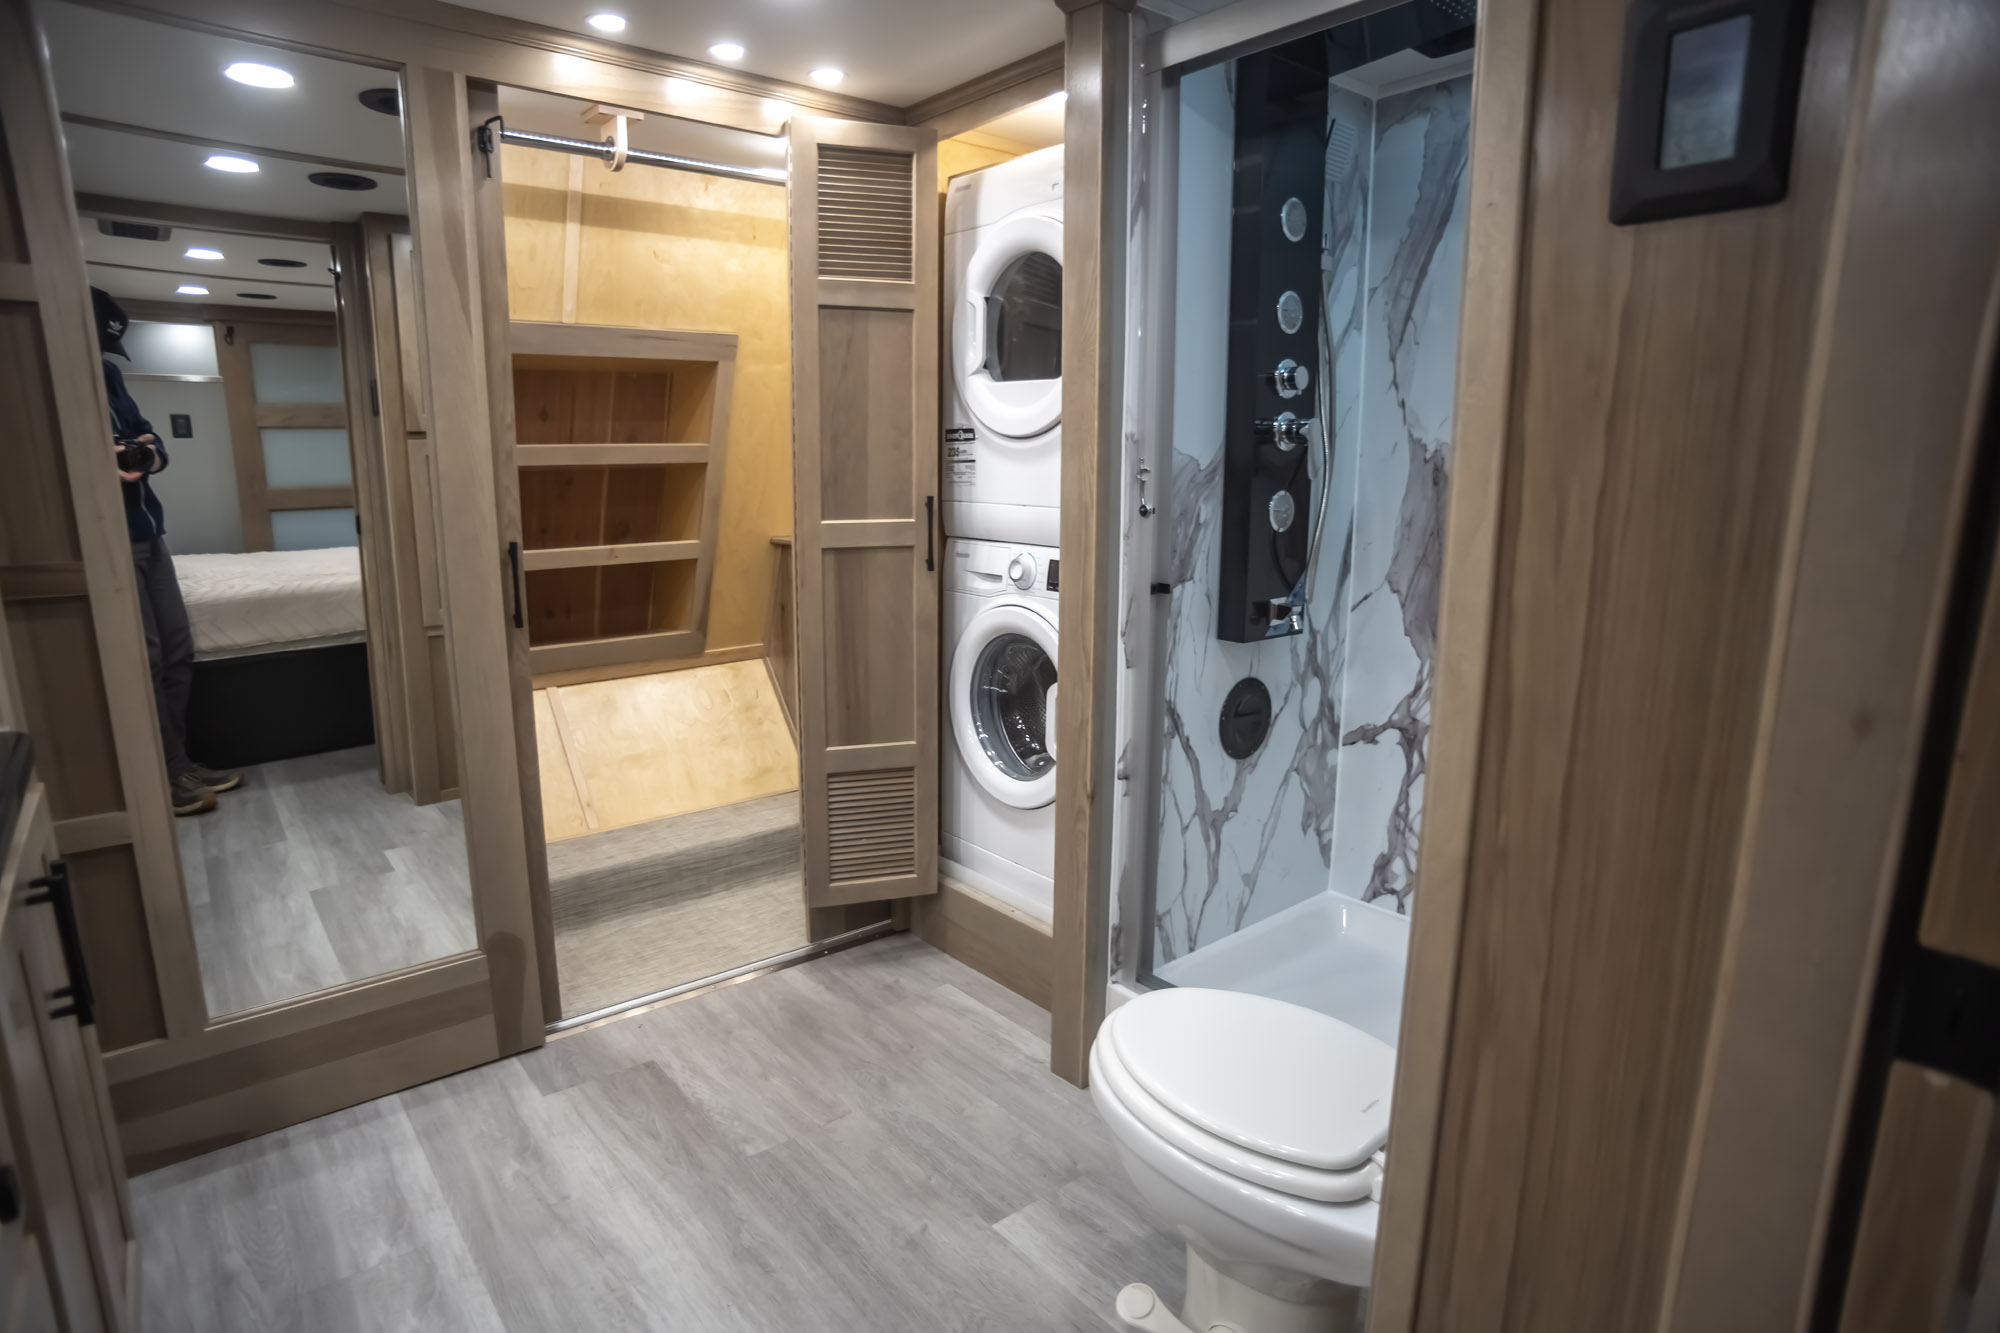 The bathroom of the Luxe Elite 46RKB.